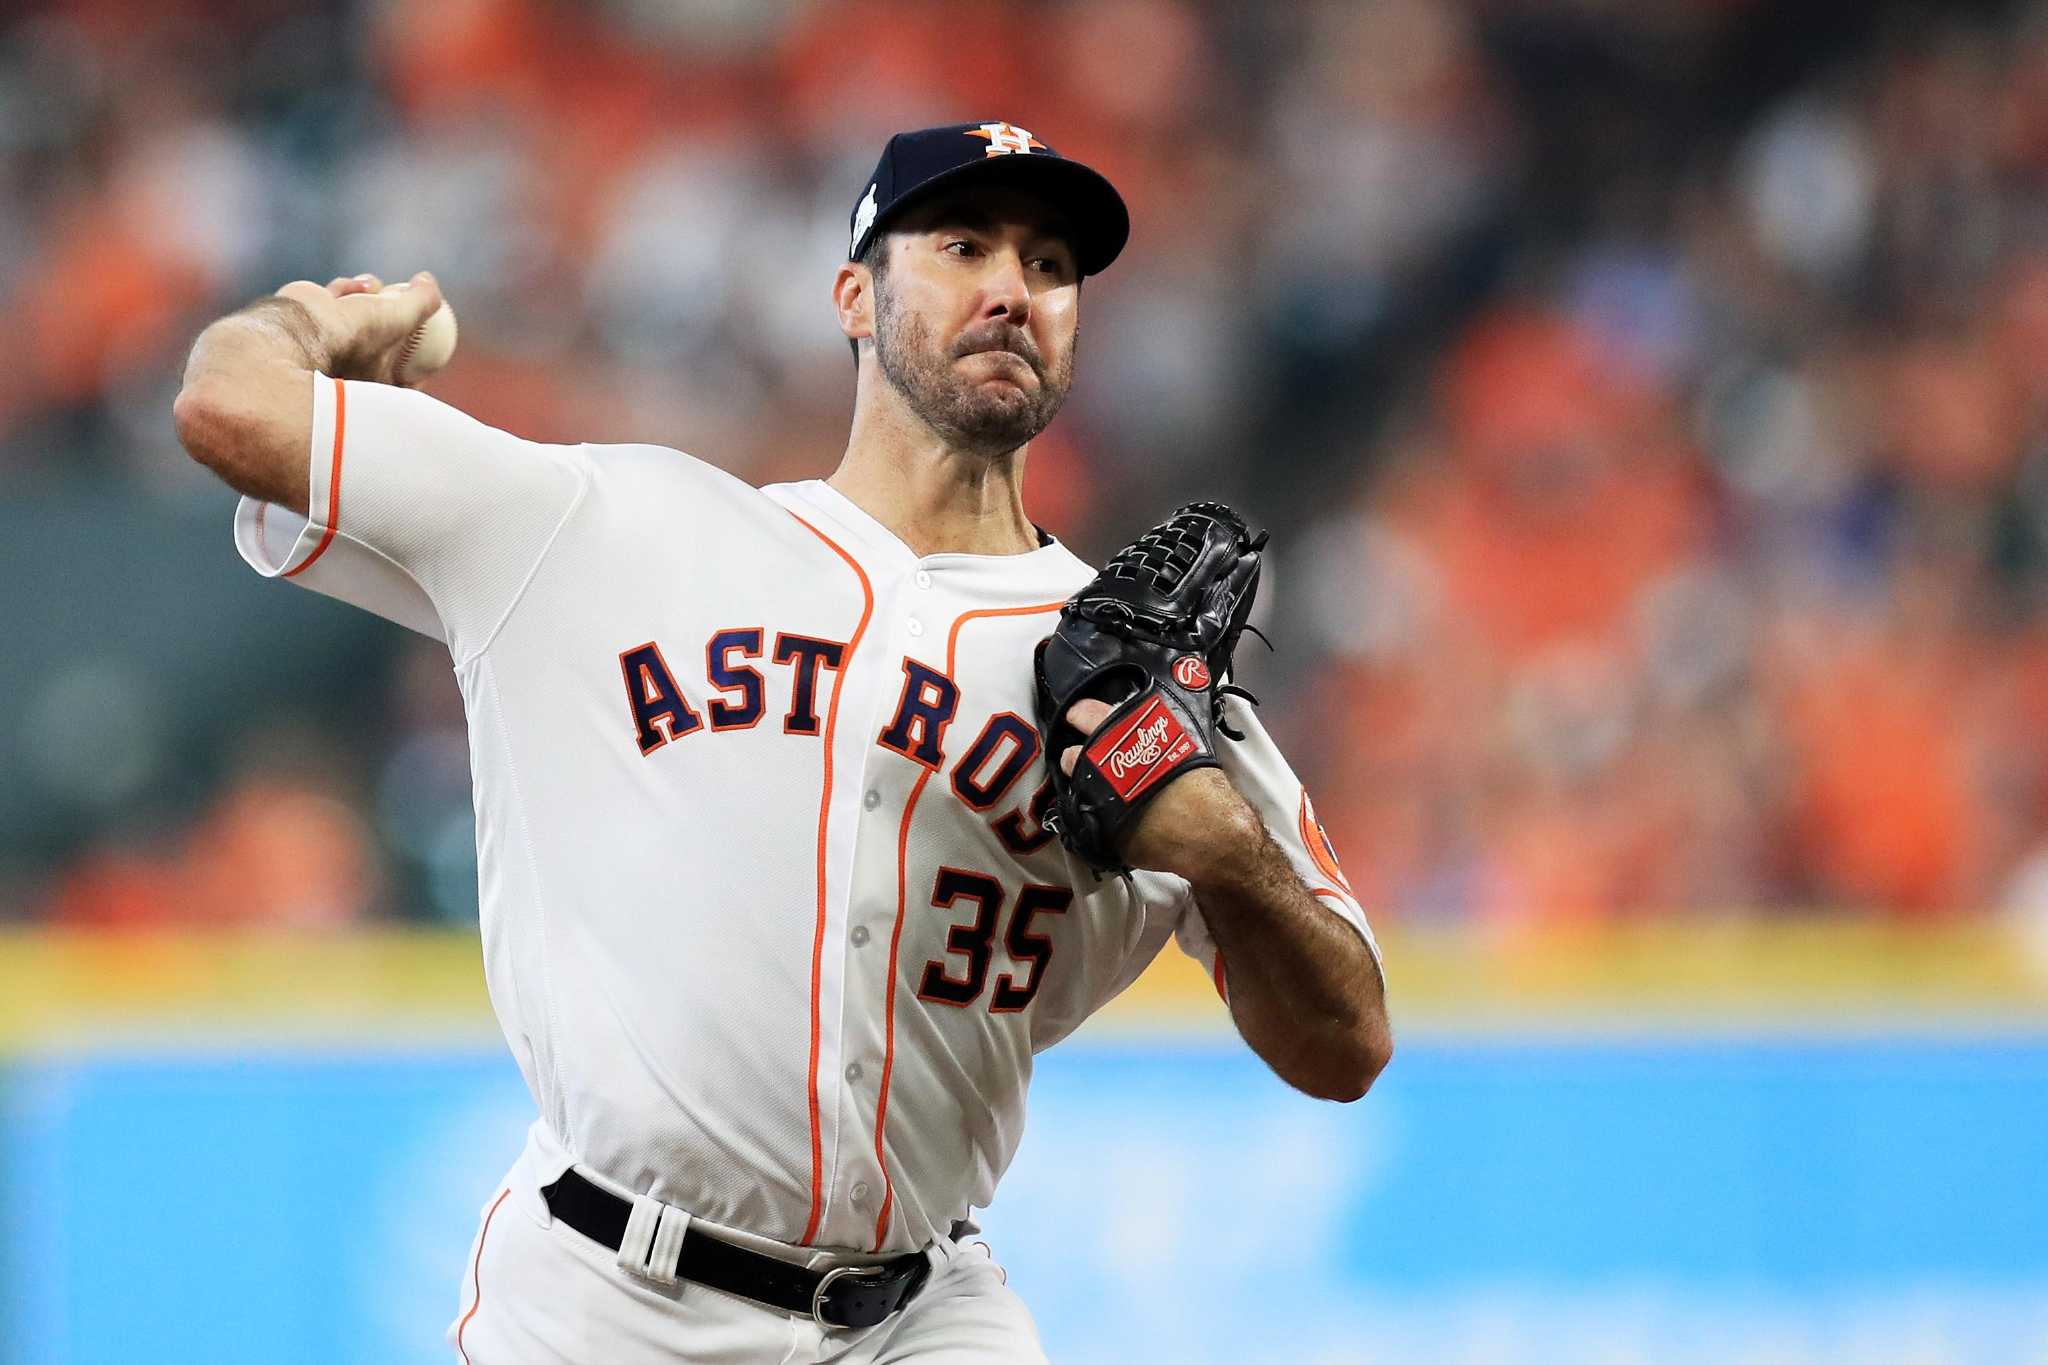 Pitcher Mike Scott of the Houston Astros delivers a pitch against the  News Photo - Getty Images